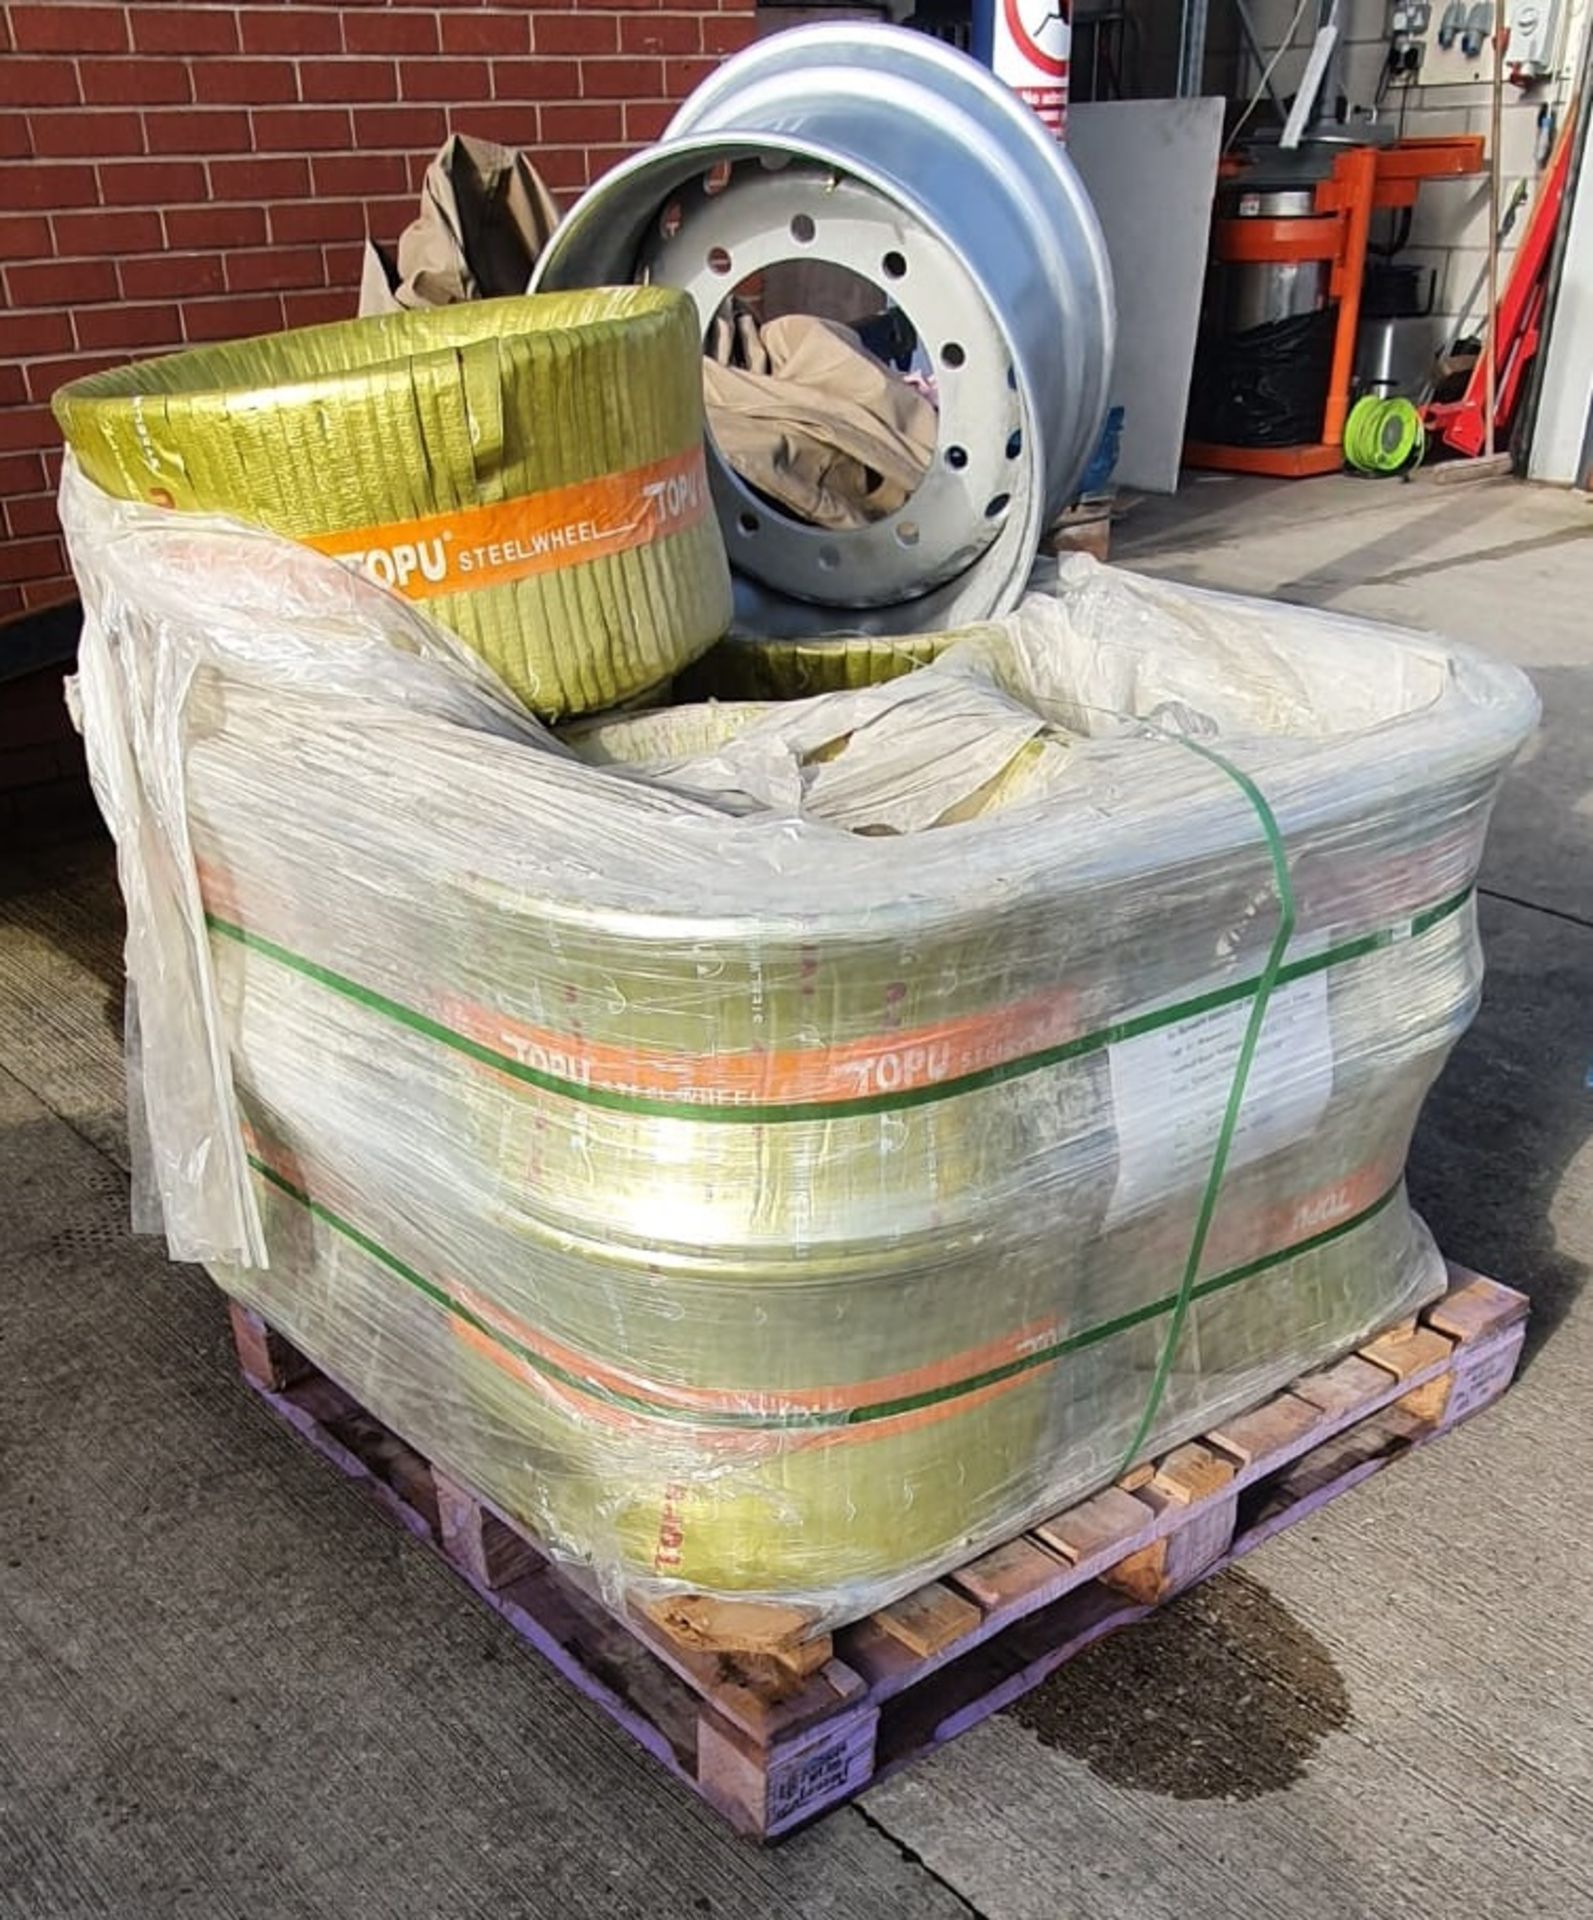 10 x TOPU Steel Truck Wheels - Unused Boxed Stock - Ref: HOC100 / WH2-SCT - CL987 - Location: - Image 3 of 3